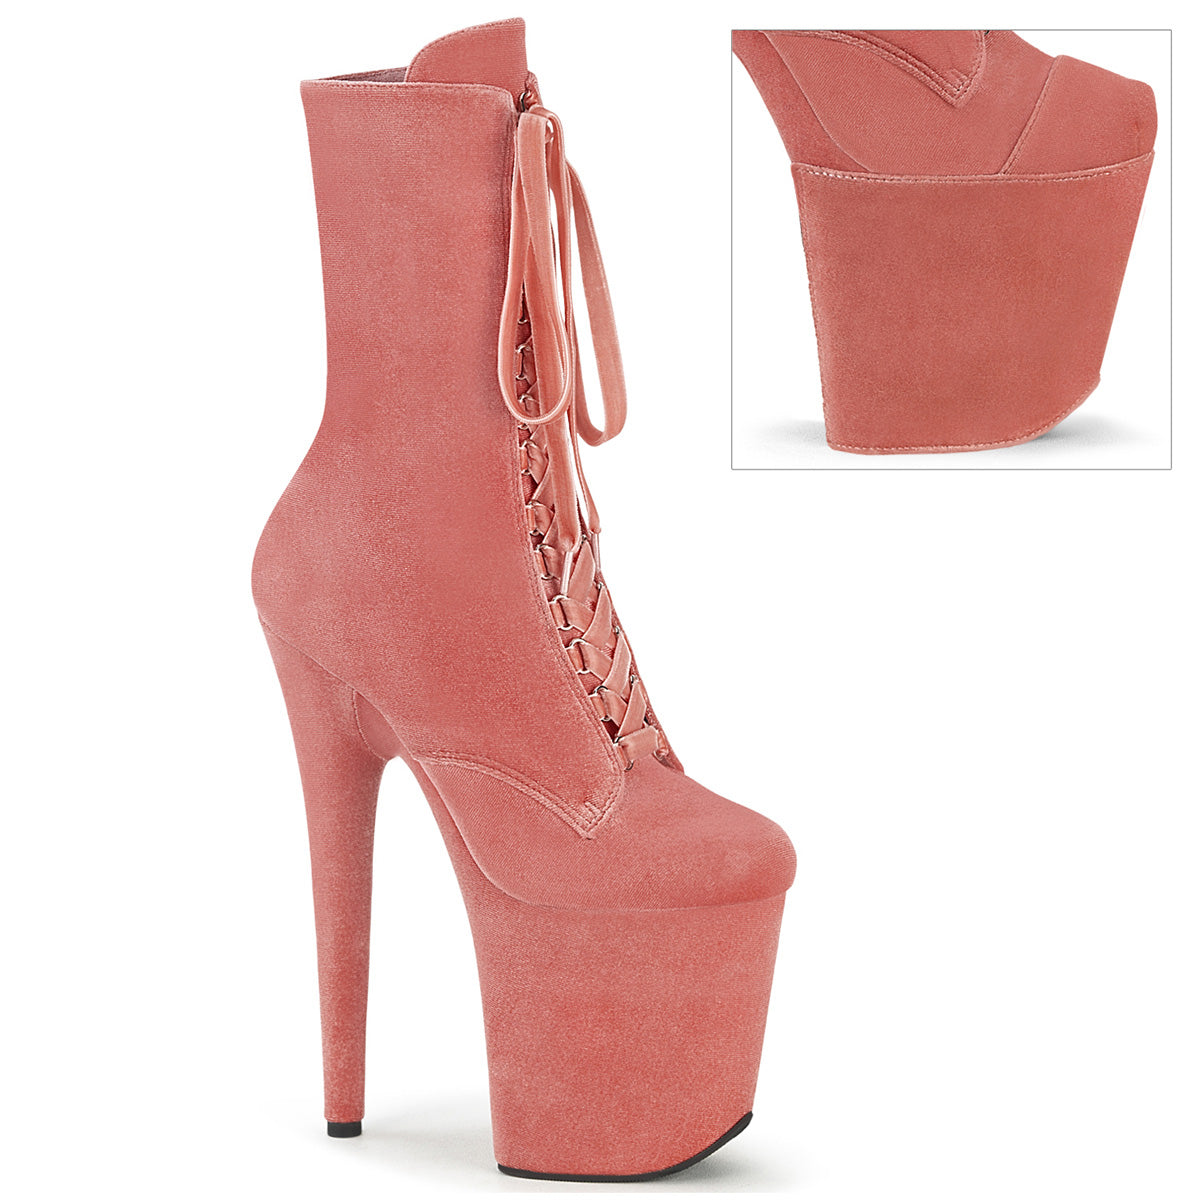 FLAMINGO-1045VEL Velvet Lace-Up Front Ankle Boot